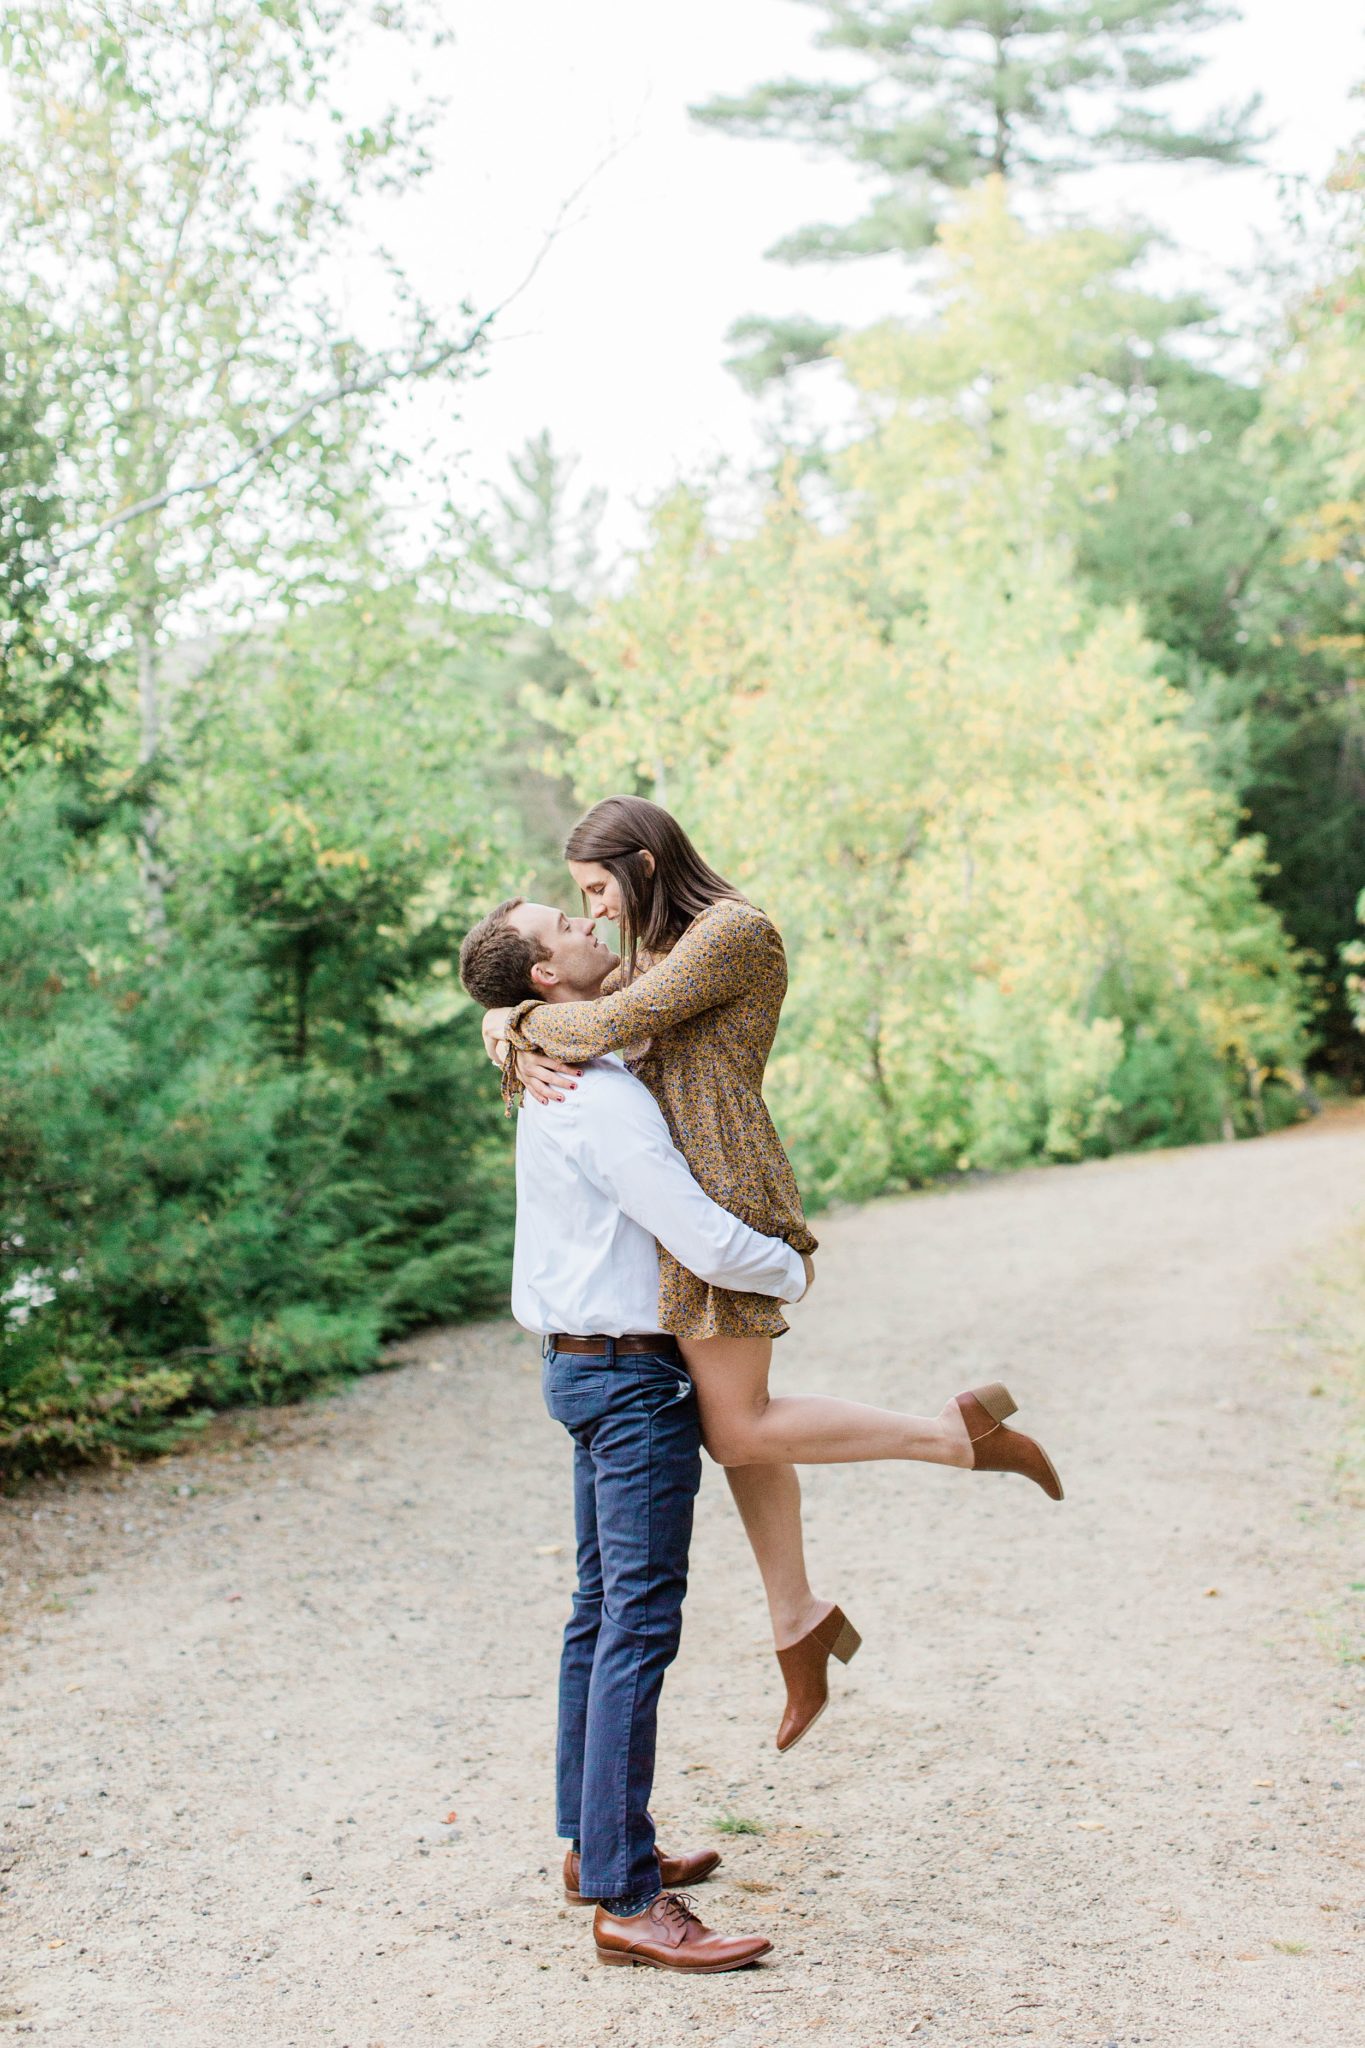 What to Wear for Your Engagement Photos | For Couples - Caitlin Page ...